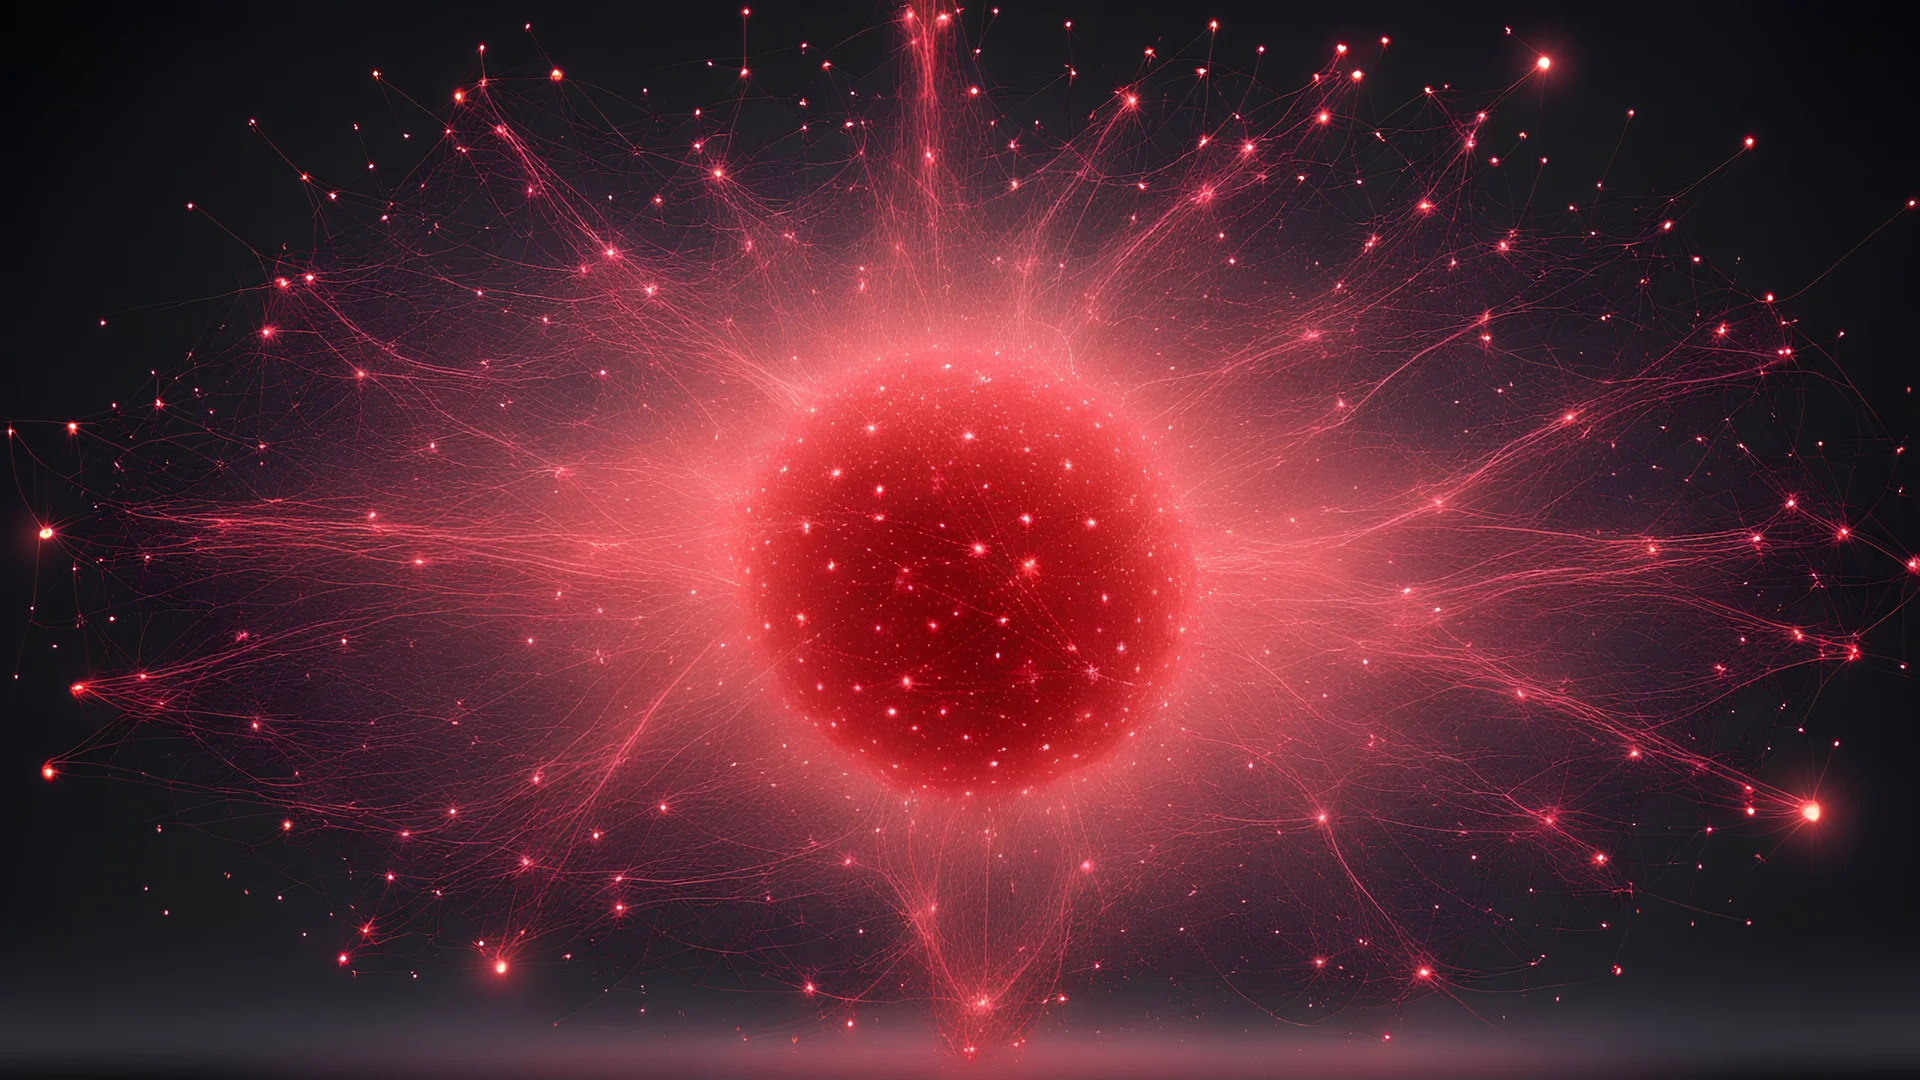 "Create a three-dimensional image depicting a central luminous particle in red, surrounded by various smaller luminous spherical particles. These smaller particles should be interconnected by luminous, multicolored lines, forming a mesh extending outwards from the central particle. The lines should also connect with other smaller particles in the vicinity, creating a complex network effect. The rendering should be high-quality to highlight the effects of light and color."